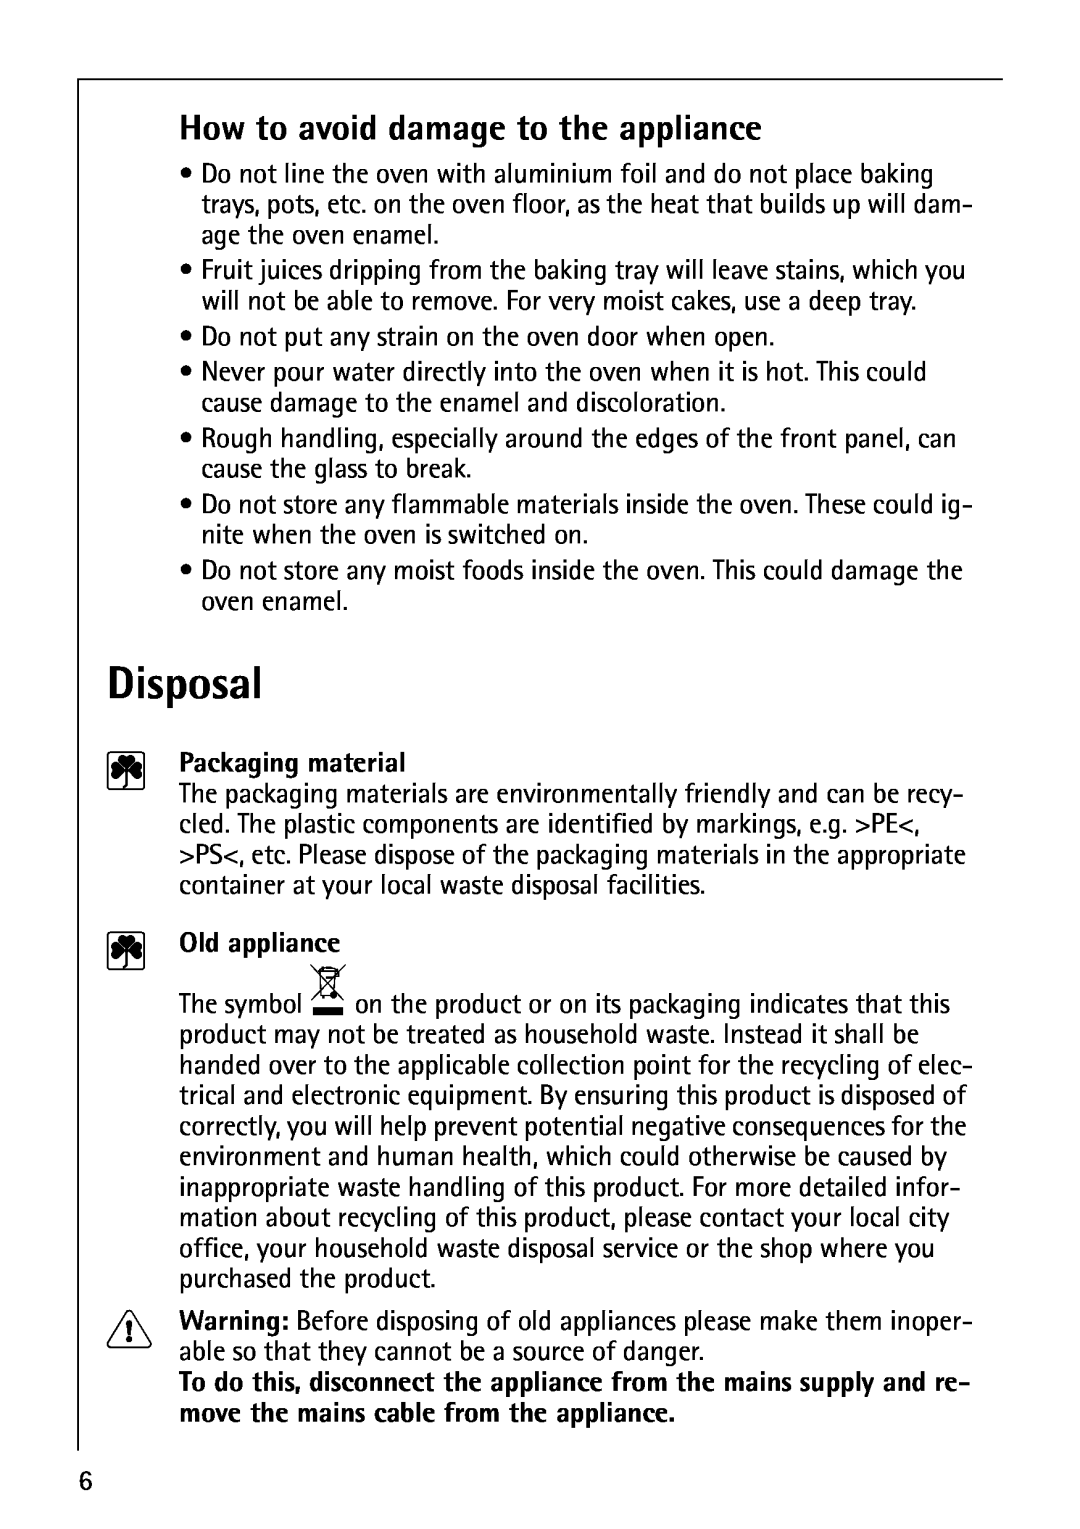 Electrolux B8871-4 manual Disposal, How to avoid damage to the appliance, Packaging material, Old appliance 